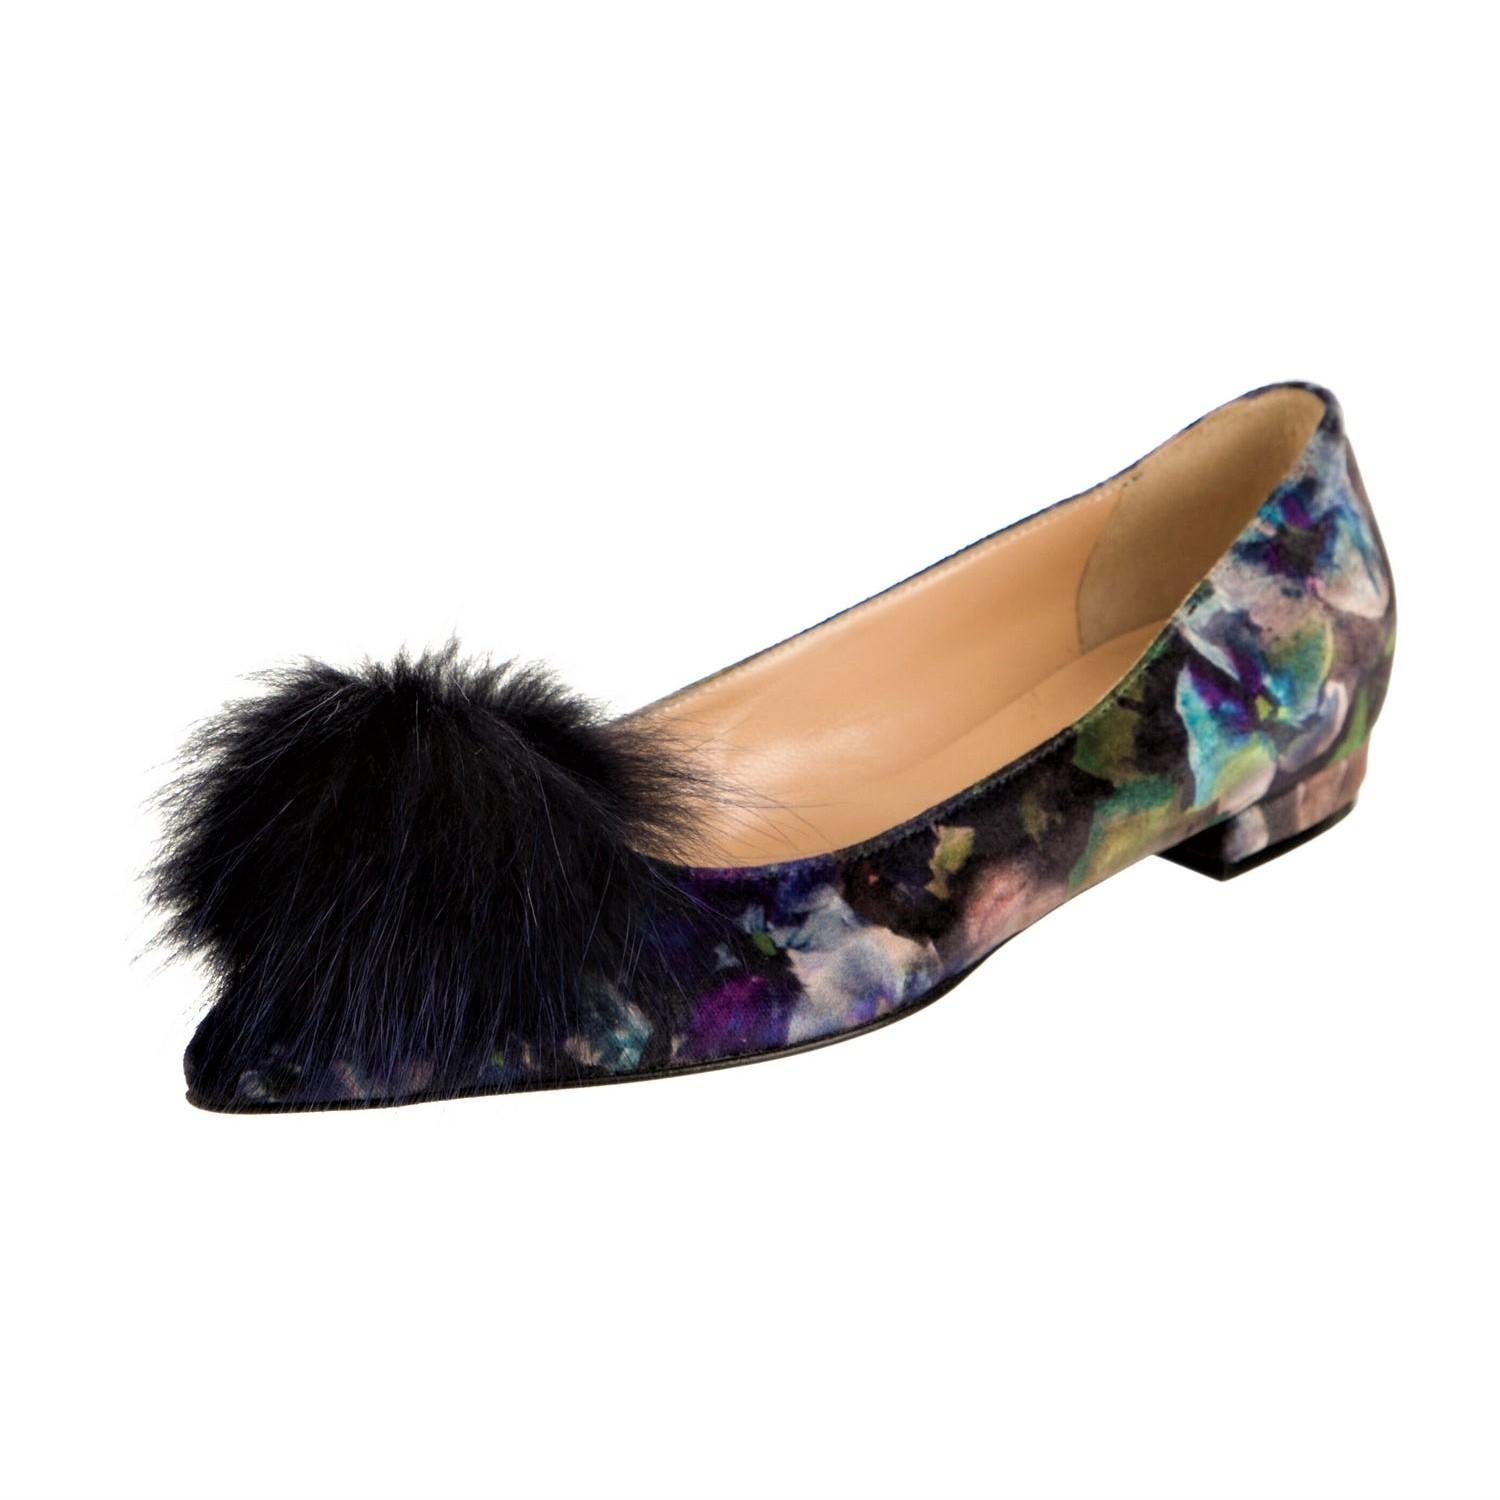 Eugenia Kim
$875
* Beautiful Multi Colored Velvet
Mink Pouf at Toe
* Eugenia Kim did a limited collection of stunning shoes

* Size: 37 (these run a half size small, so a U.S. 6.5)
* Flats
Heels: 0.75